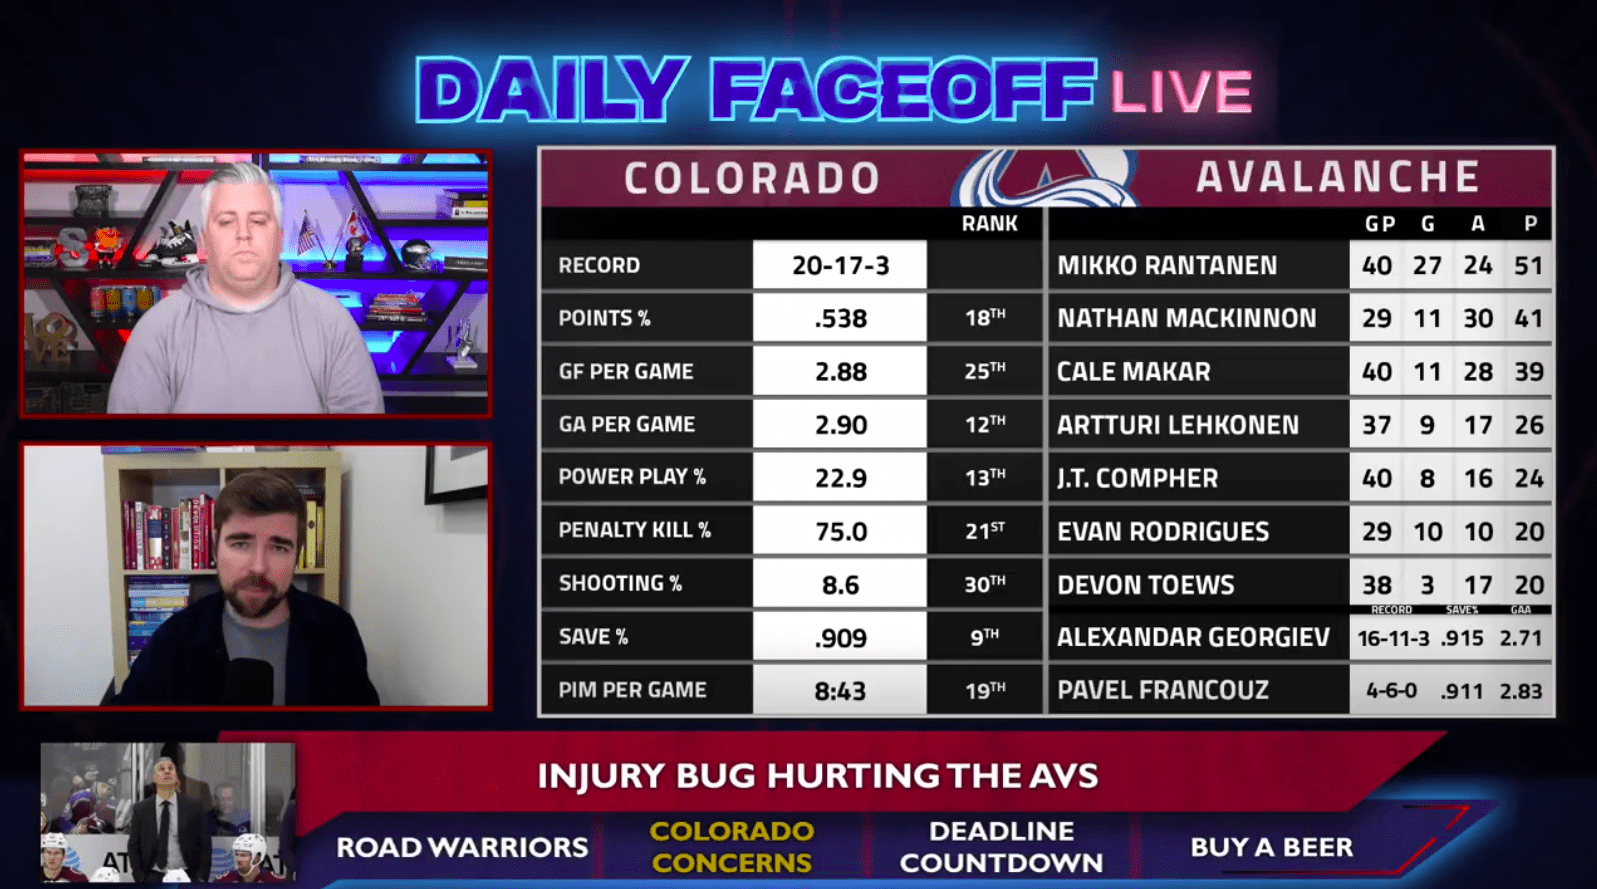 The Daily Faceoff Show: Bowen Byram will return to the Avalanche lineup on  Tuesday - Daily Faceoff